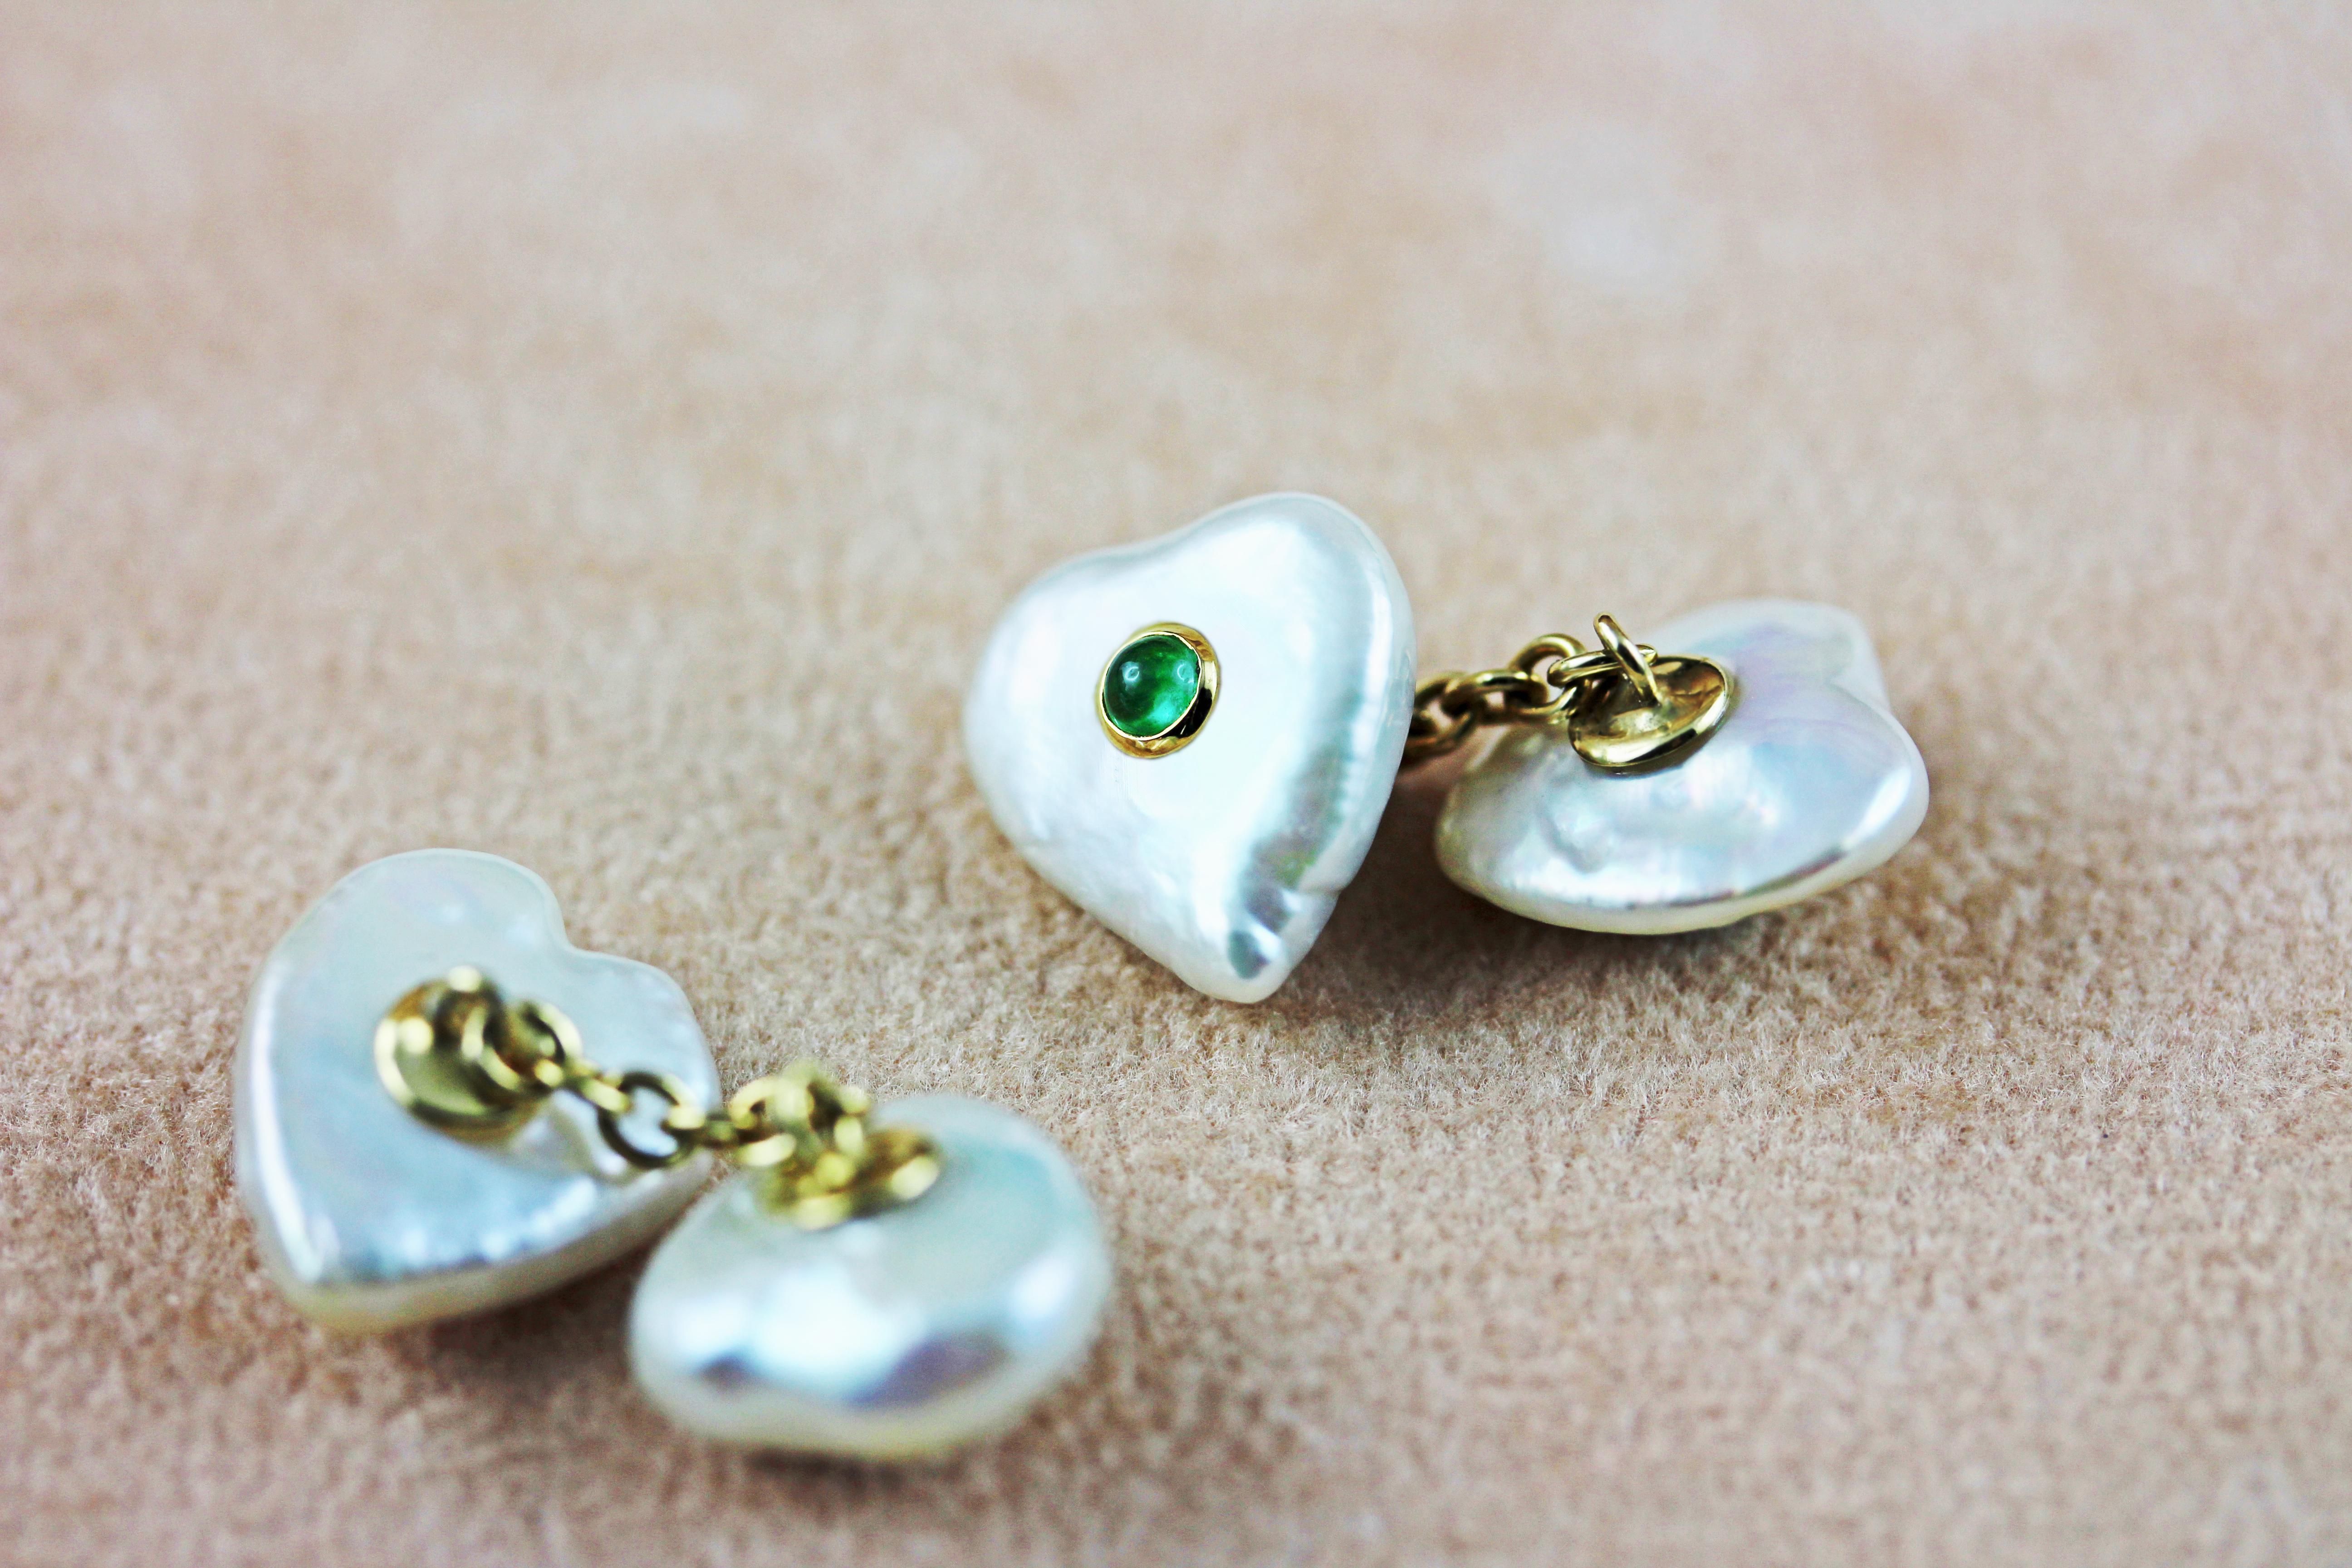 Shaped as hearts, the Keshi pearls that make both front face and toggle of these striking cufflinks are one-of-a-kind accents that make this piece charming and timeless. 
Each pearl is adorned in the center with one cabochon emerald stone mounted in